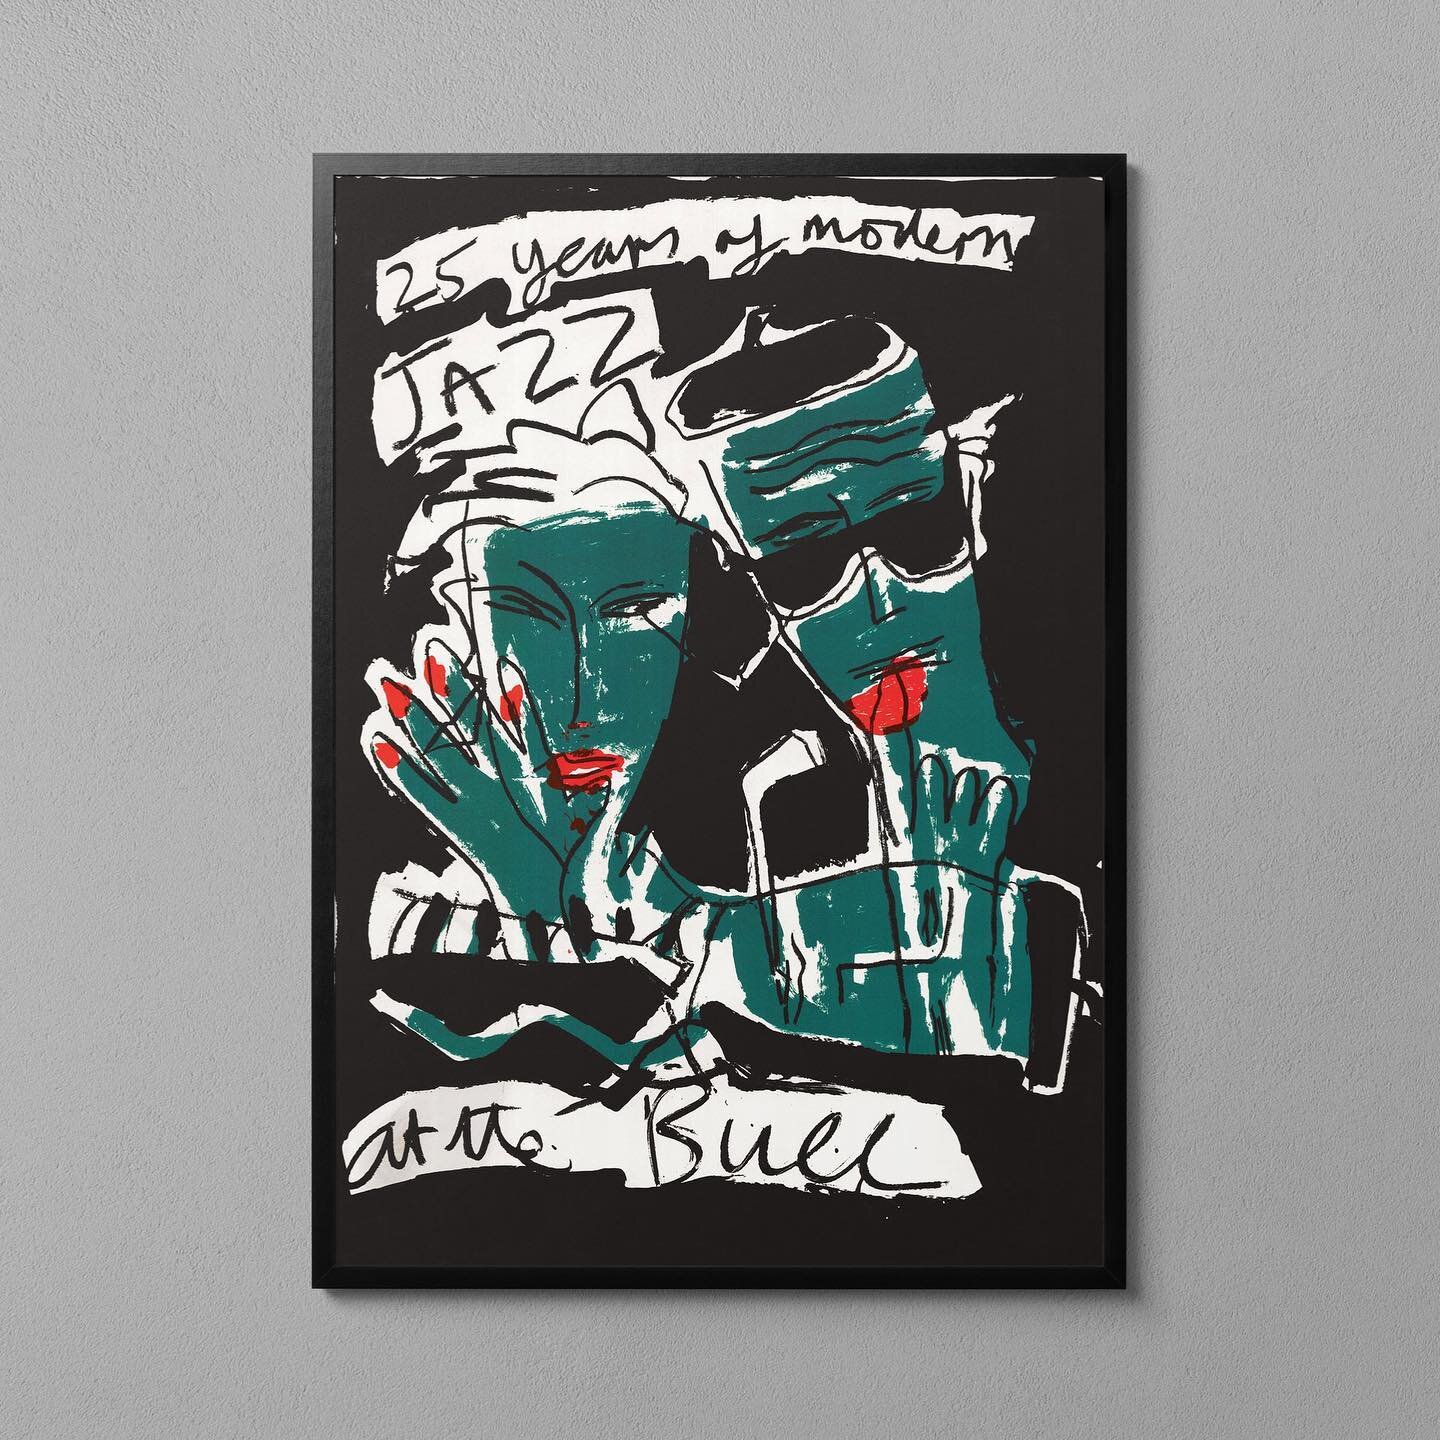 Available to buy exclusively at Department for Art. Bruce McLean, 25 Years of Modern Jazz Poster. The Bulls Head, Barnes, London &ndash; 1984. 
.
Department for Art (DFA) are pleased to announce the release of a series of facsimiles of original Bruce